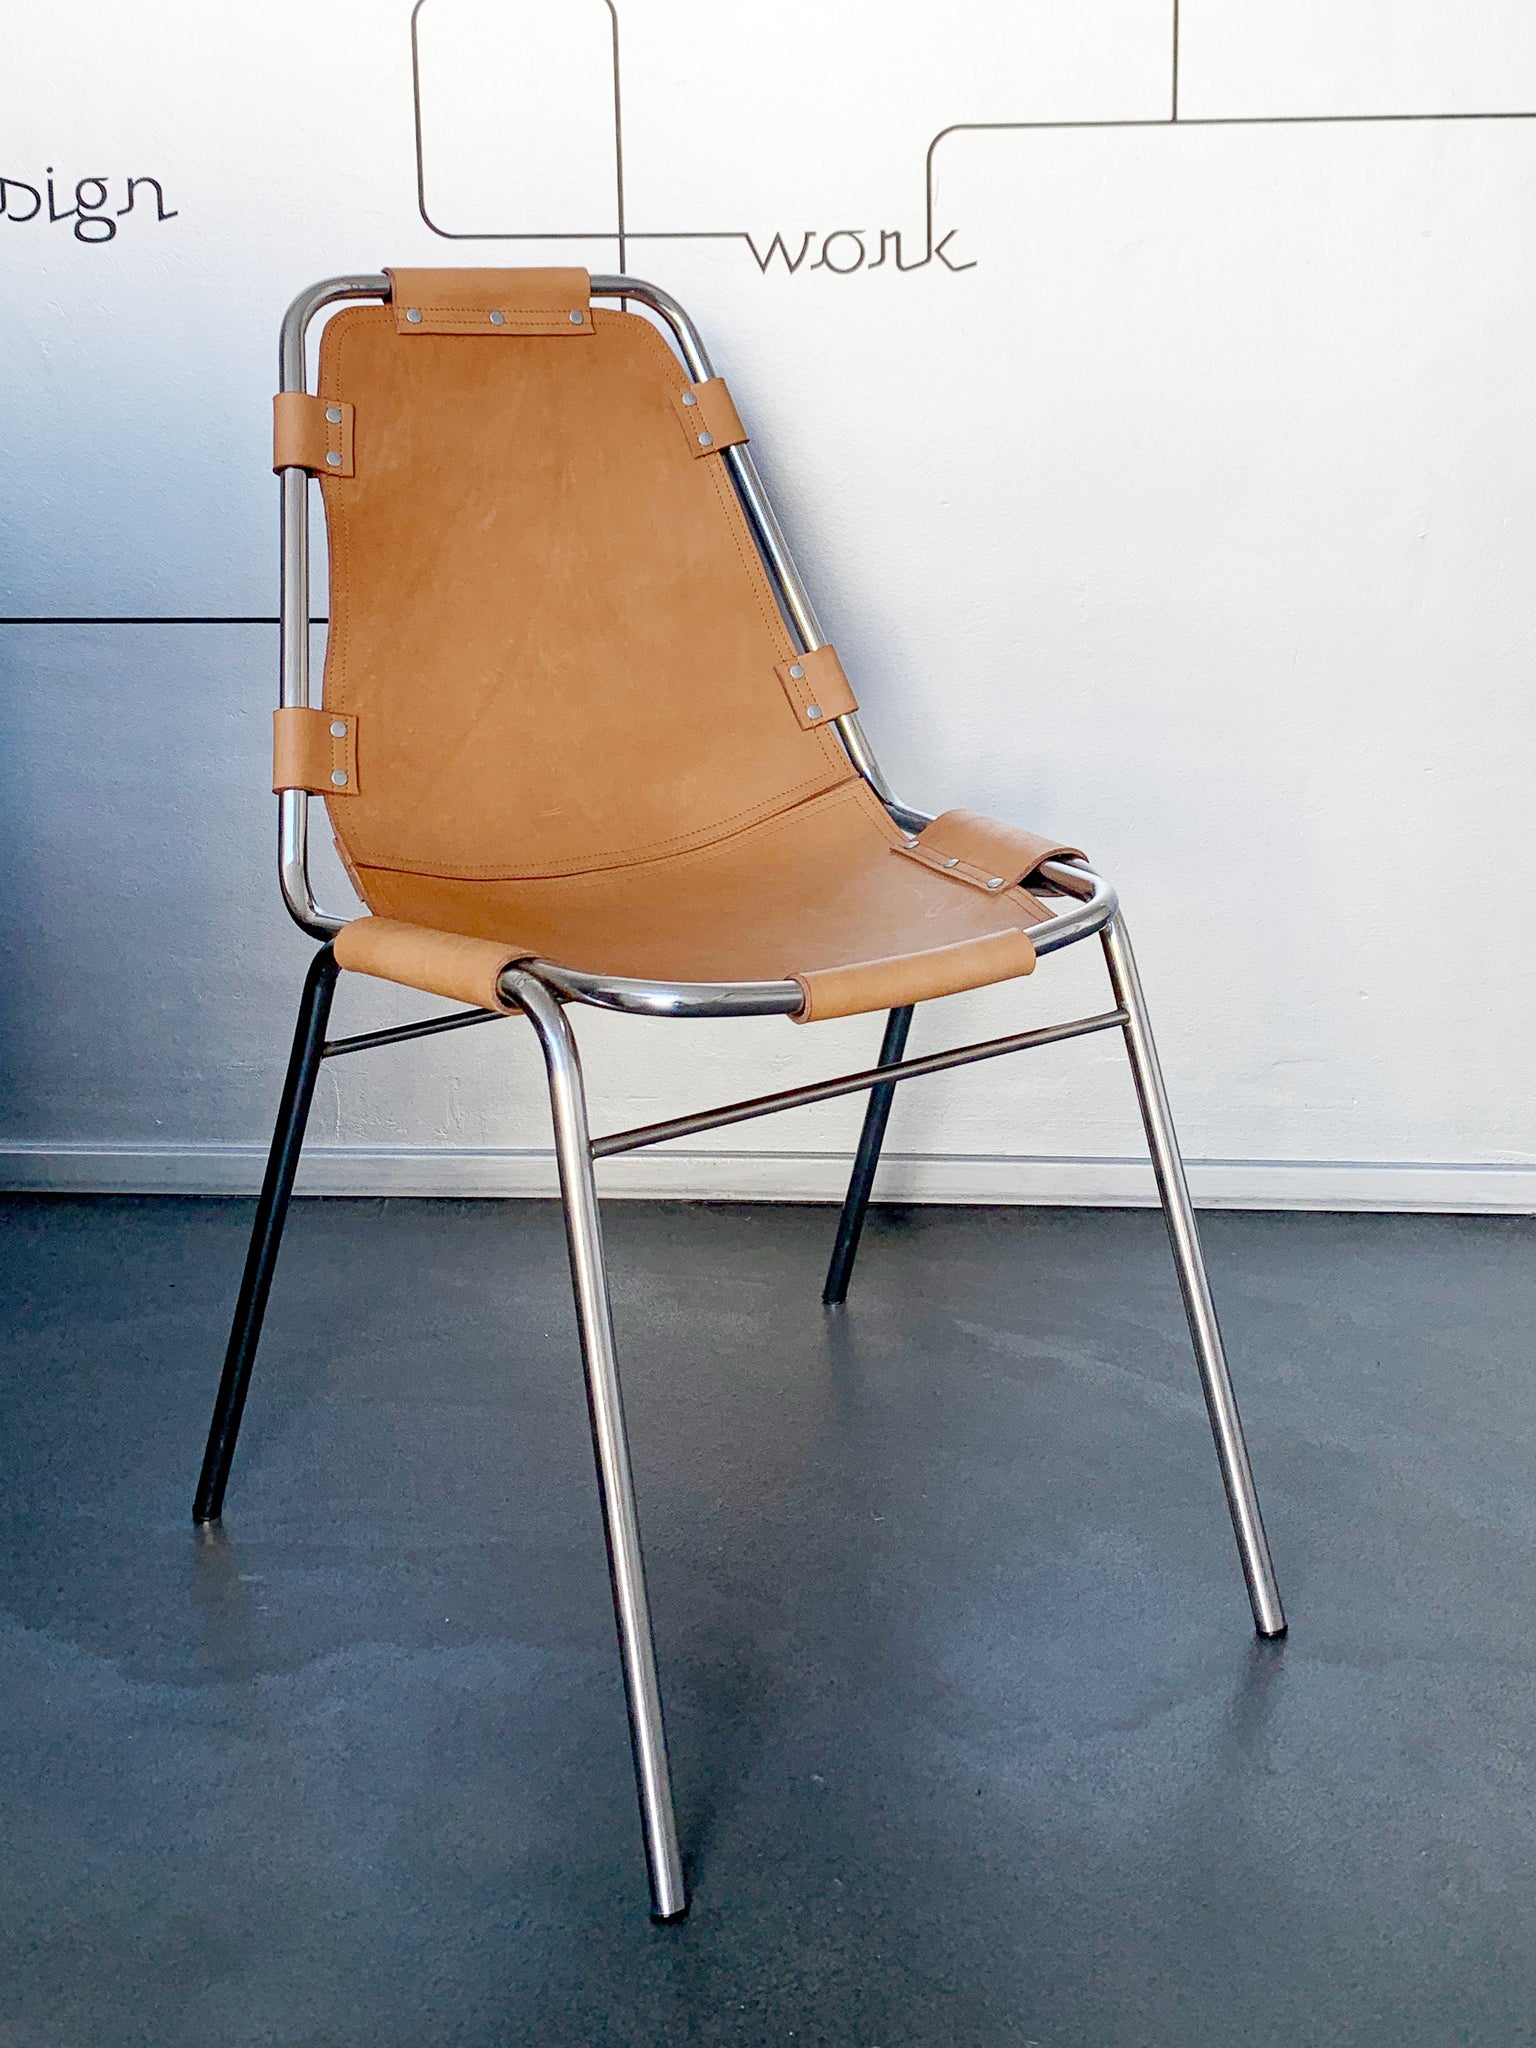 Charlotte Perriand - Dining chair by Charlotte Perriand made for Les Arcs -  1960's